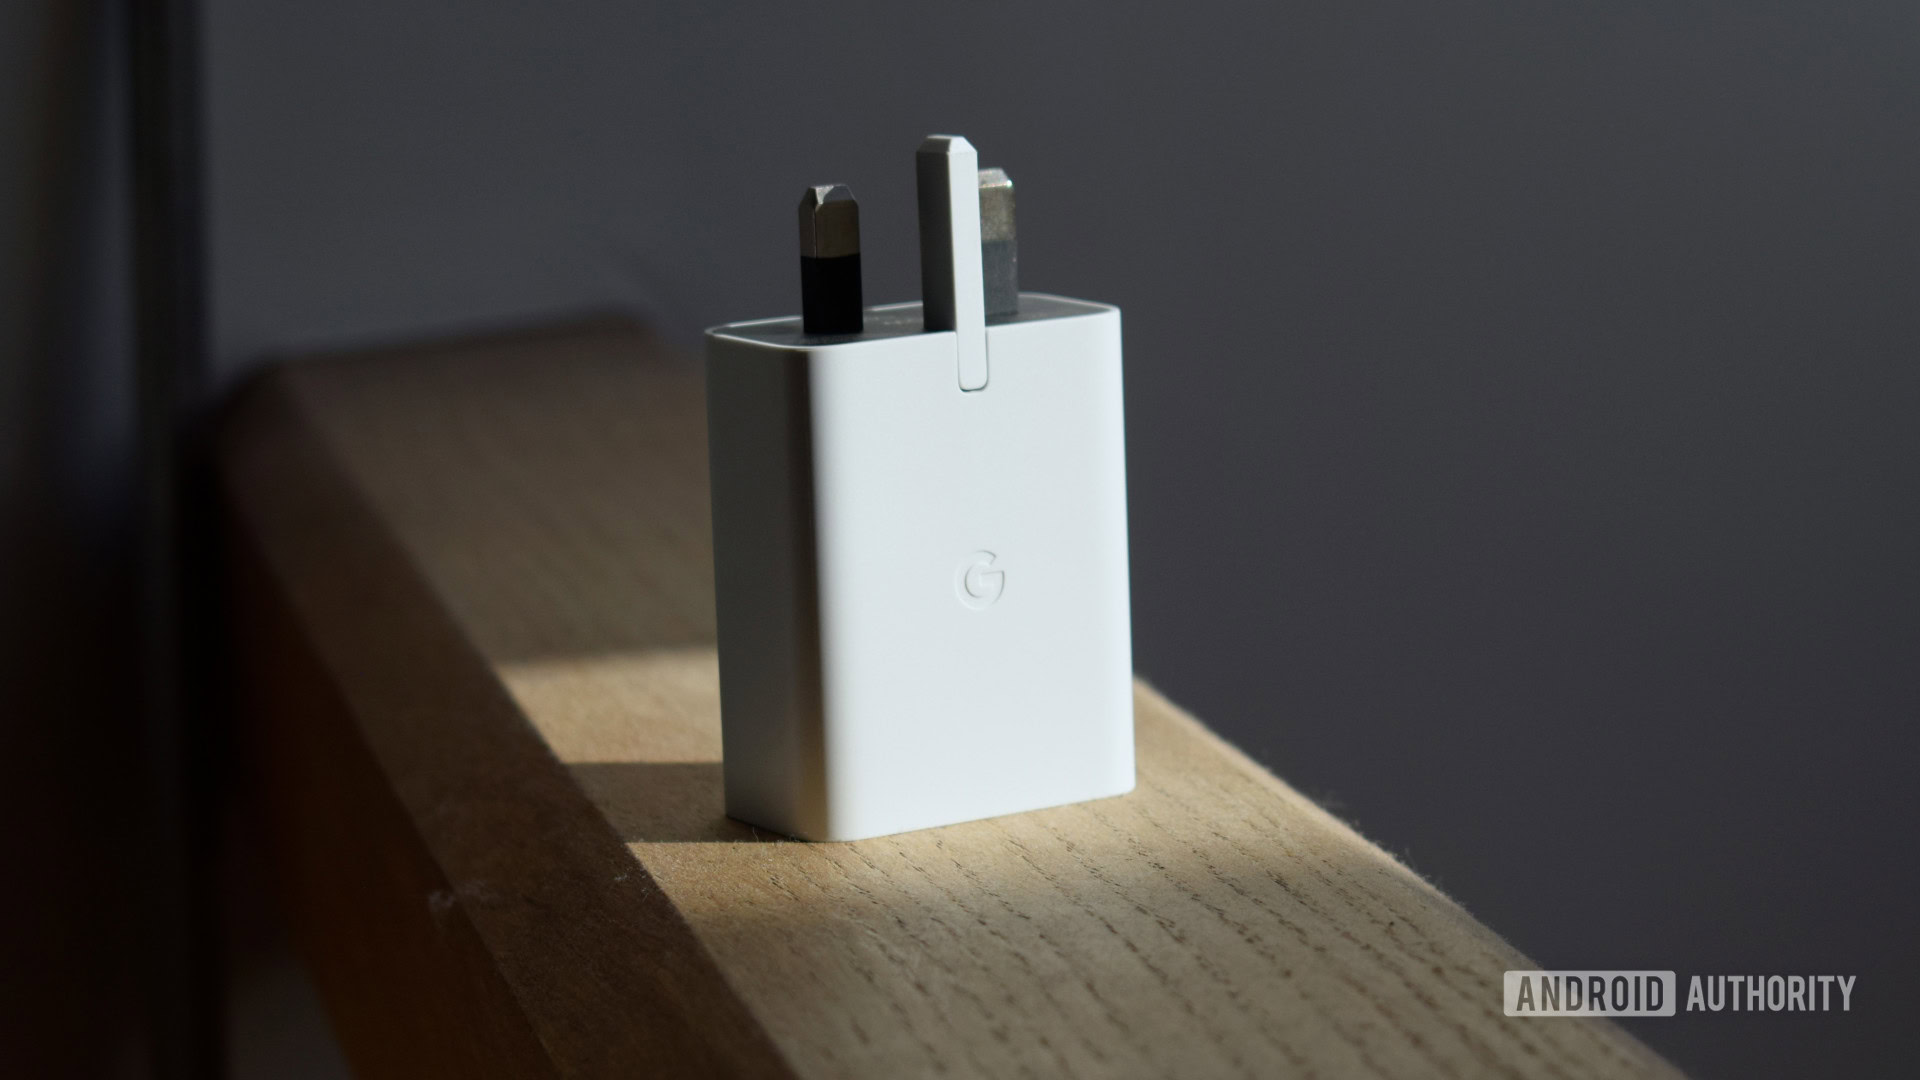 The Google 30W USB-C Power Adapter stands upright on a wooden beam.